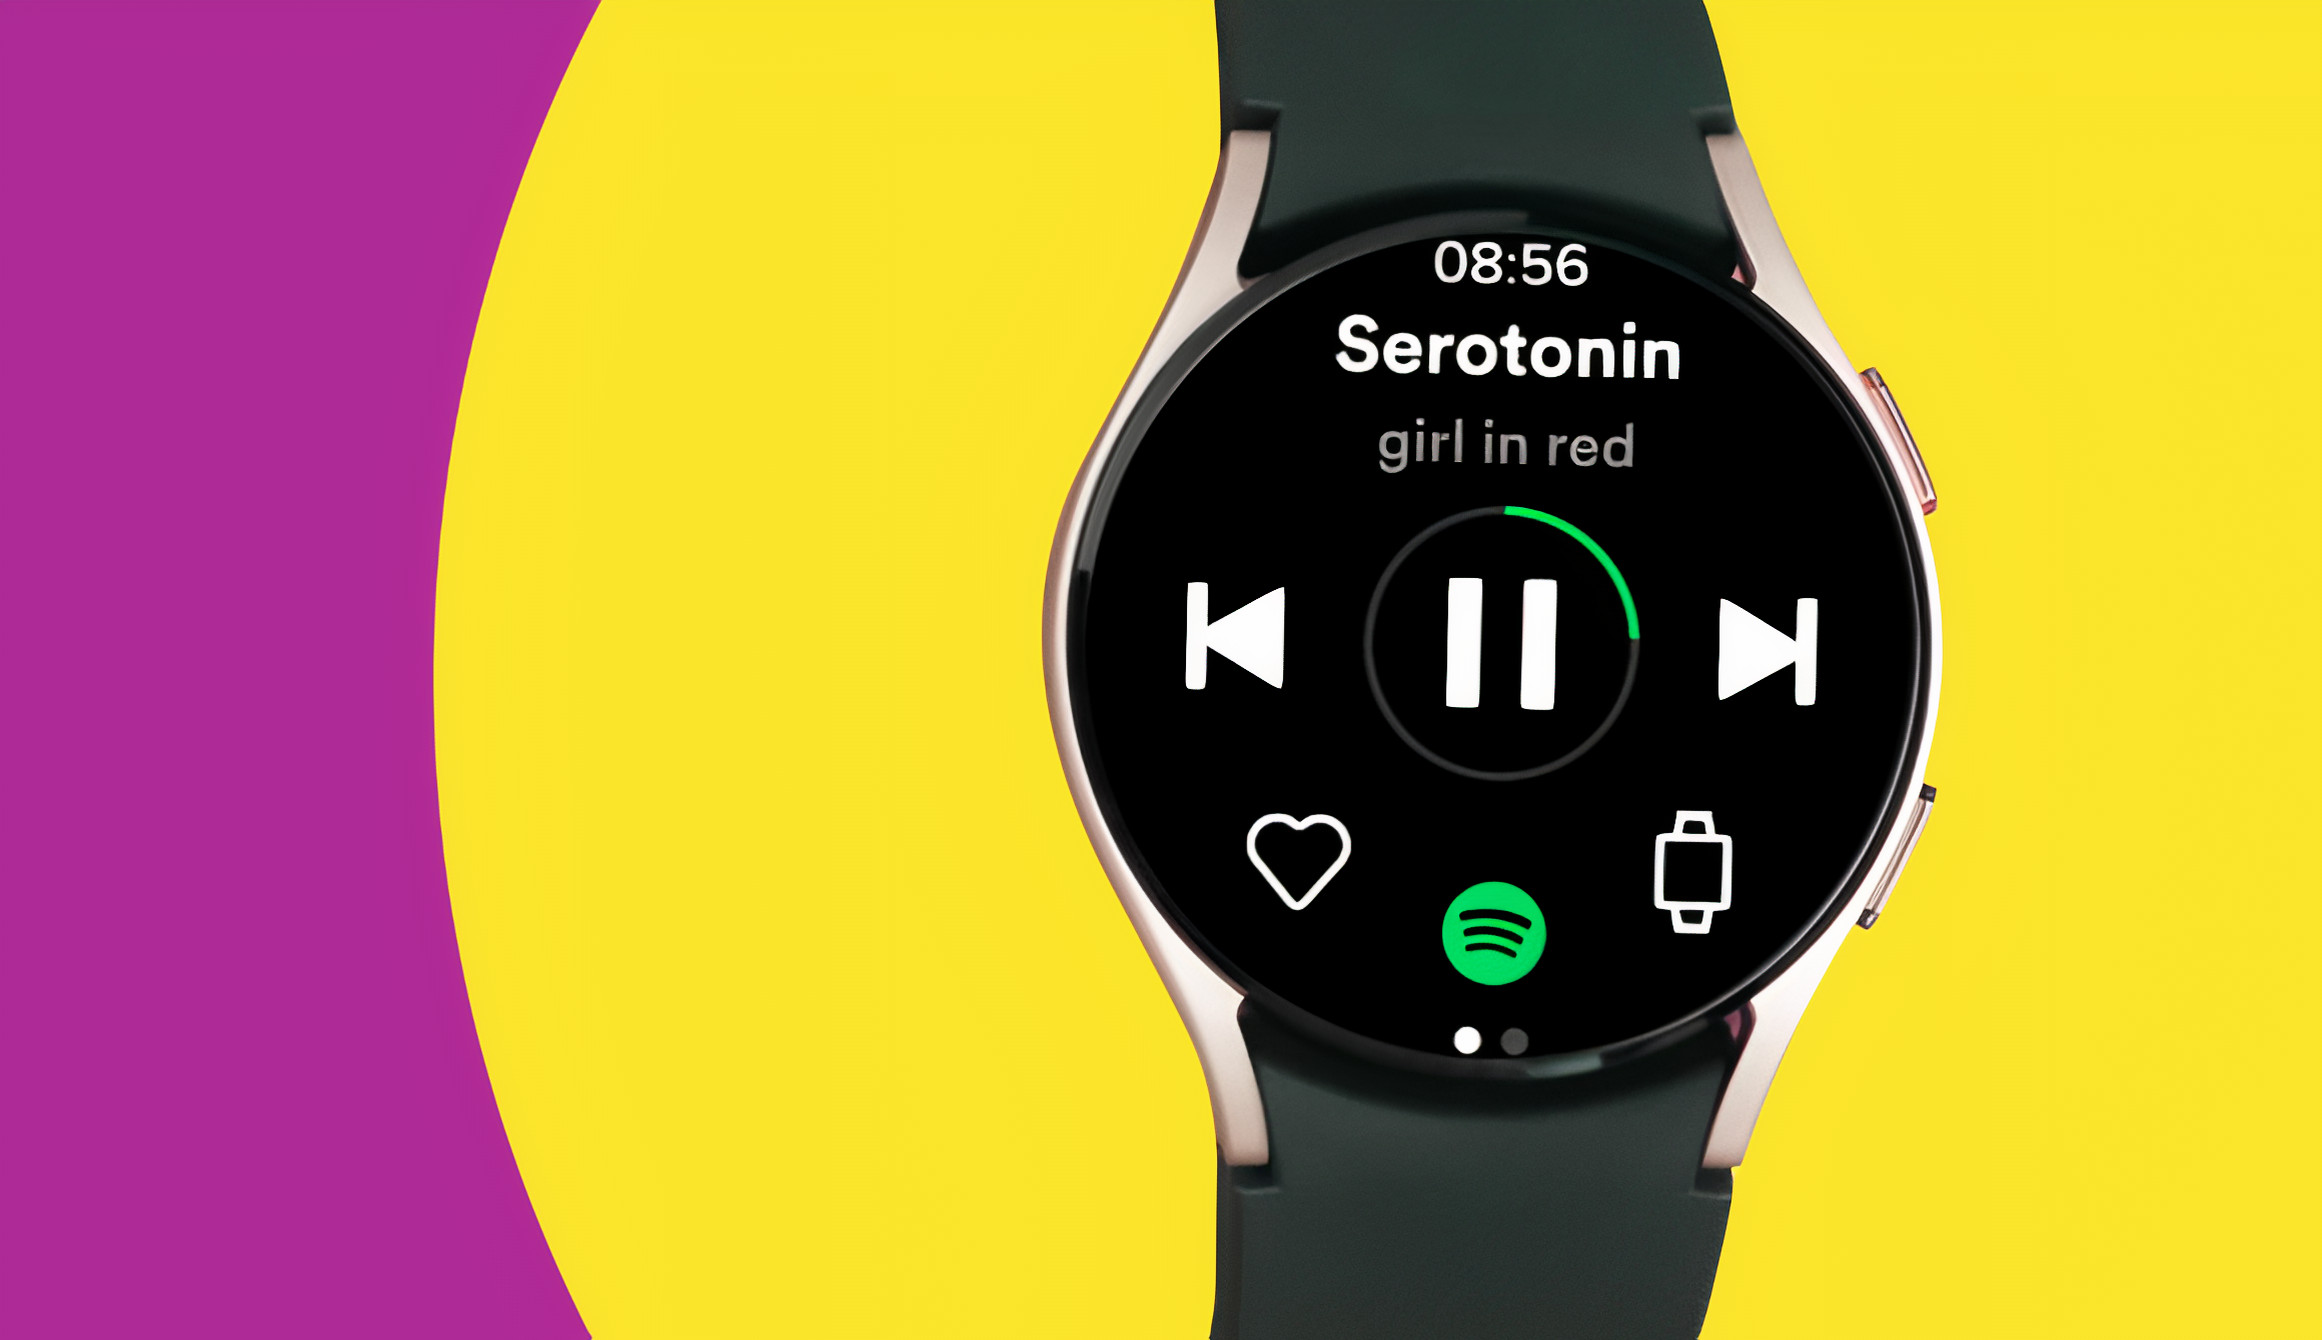 Spotify's latest Wear OS app supports direct streaming and downloads